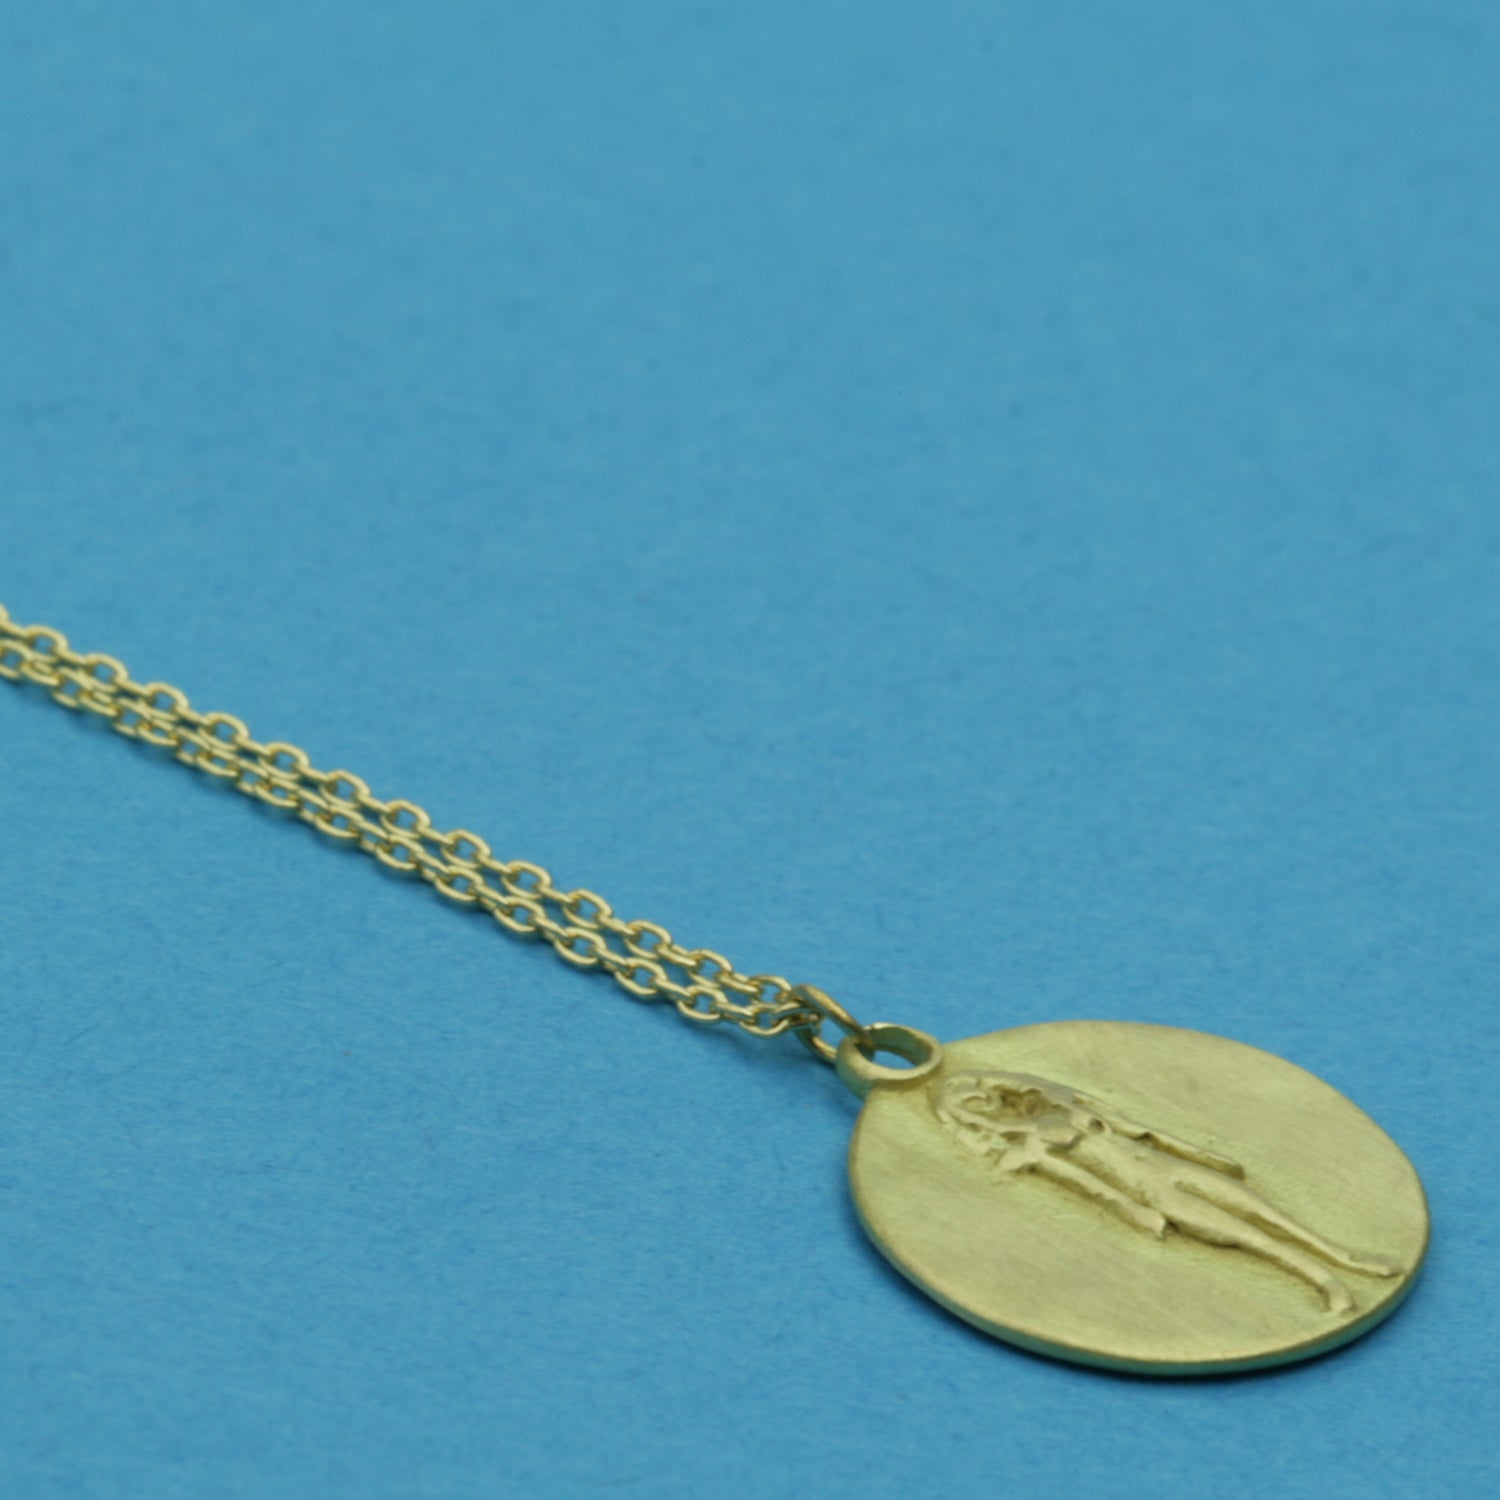 Virgo Medal on cable chain, side view